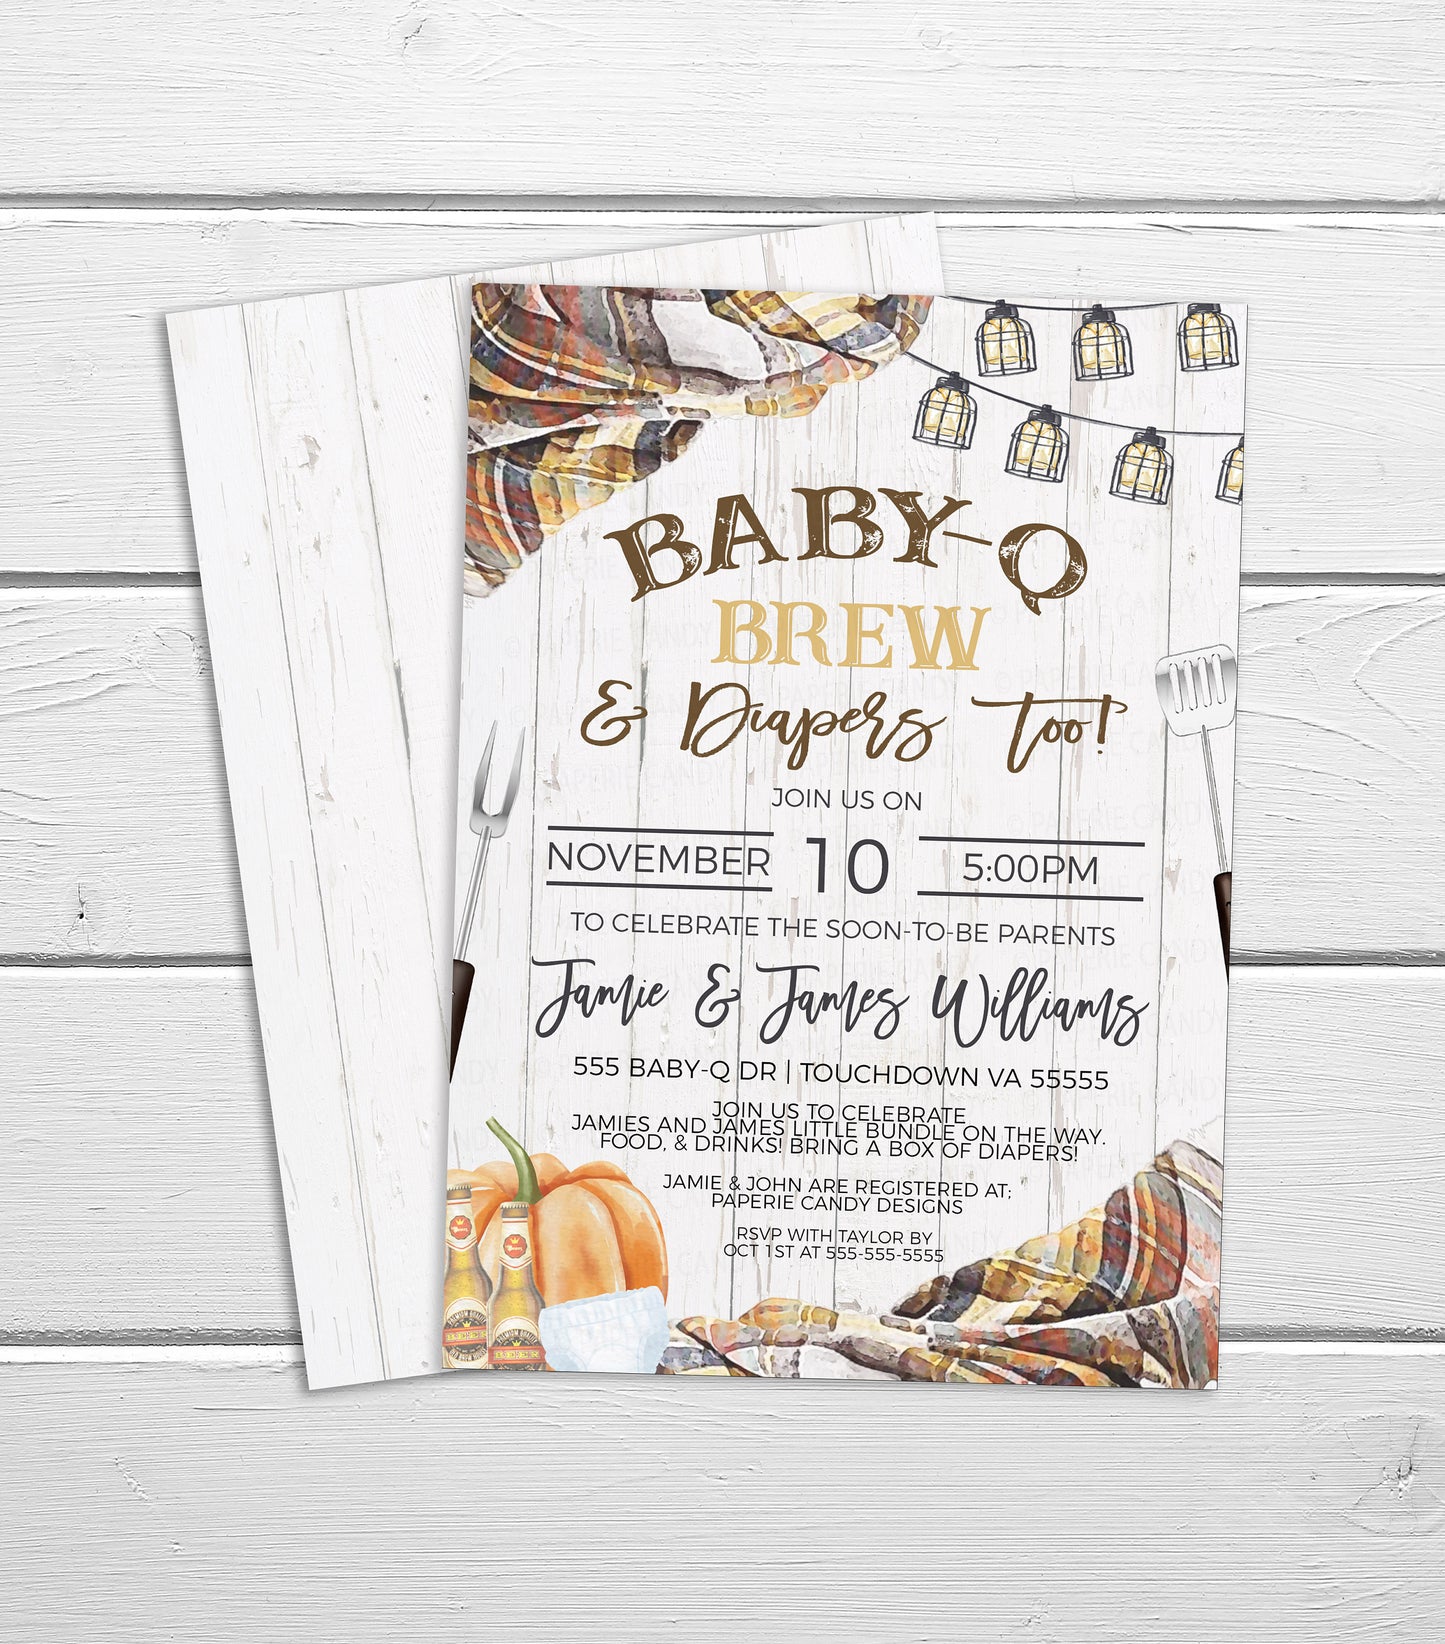 Fall Baby-Q Brew Diaper Shower Invitation, Autumn BBQ Beer Diapers Invite, Backyard Barbecue, Couples Baby Shower, Editable Printable